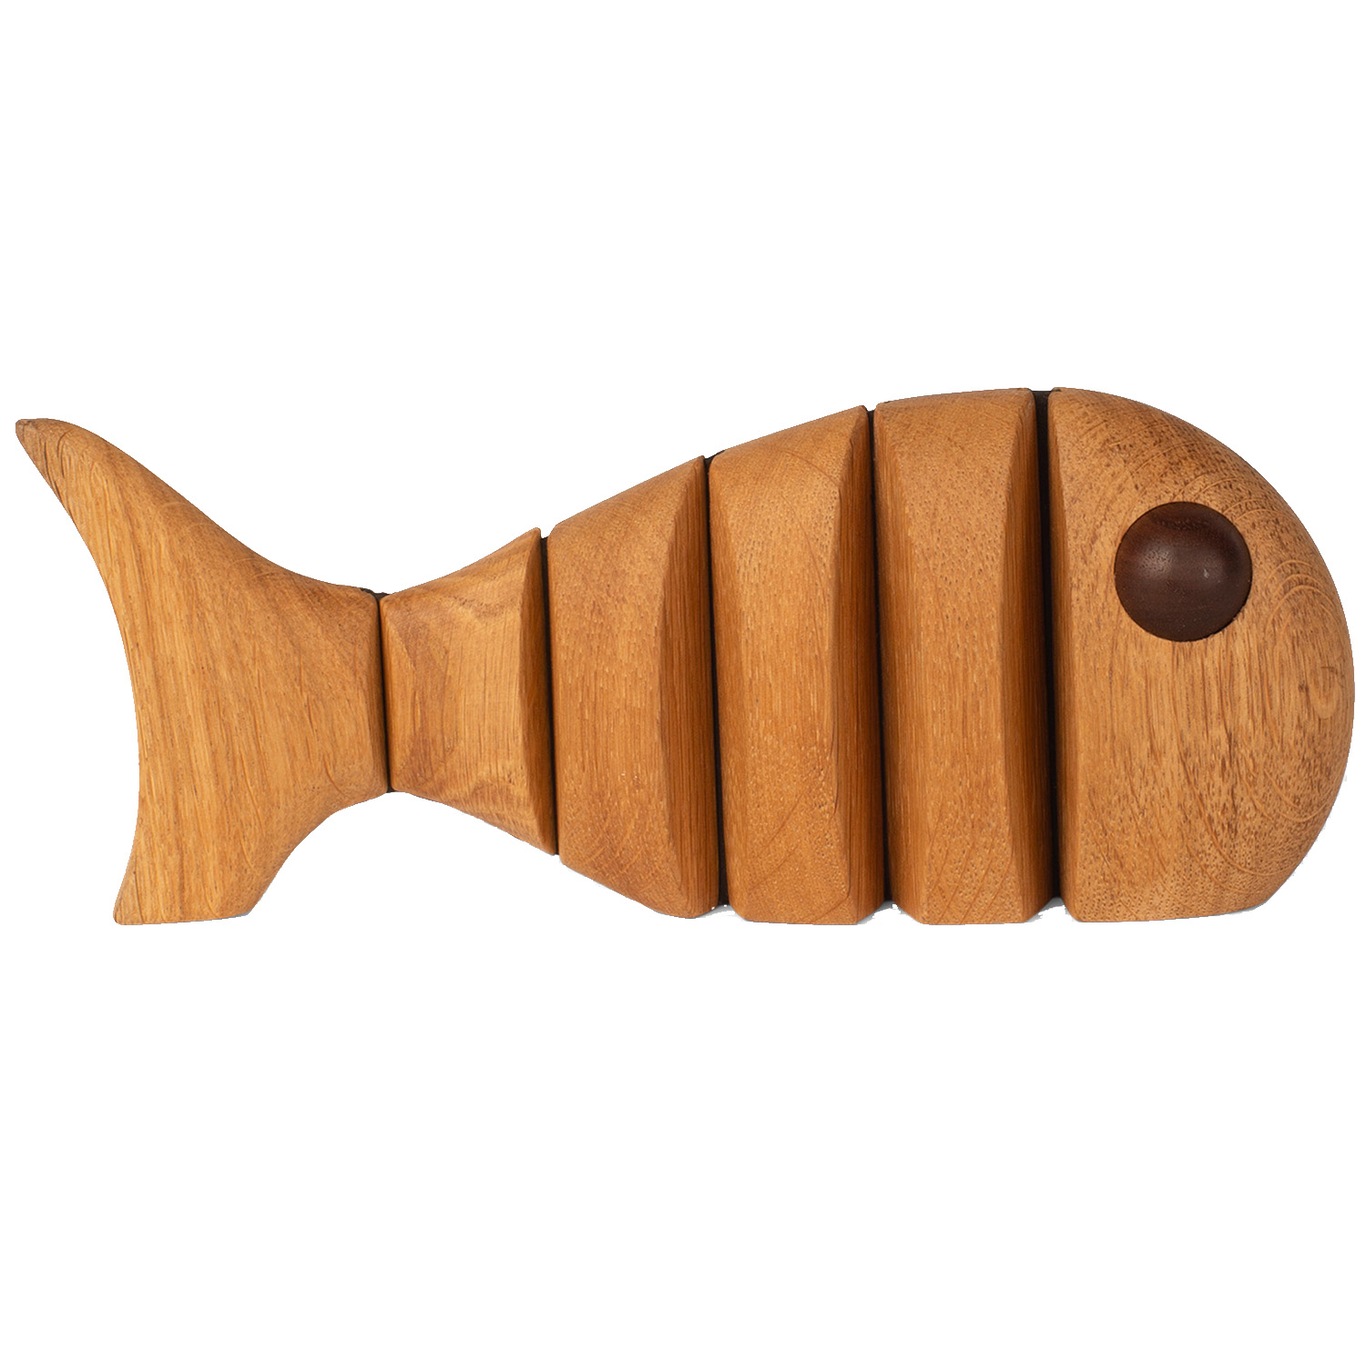 The Wood Fish Wooden Figurine 22 cm